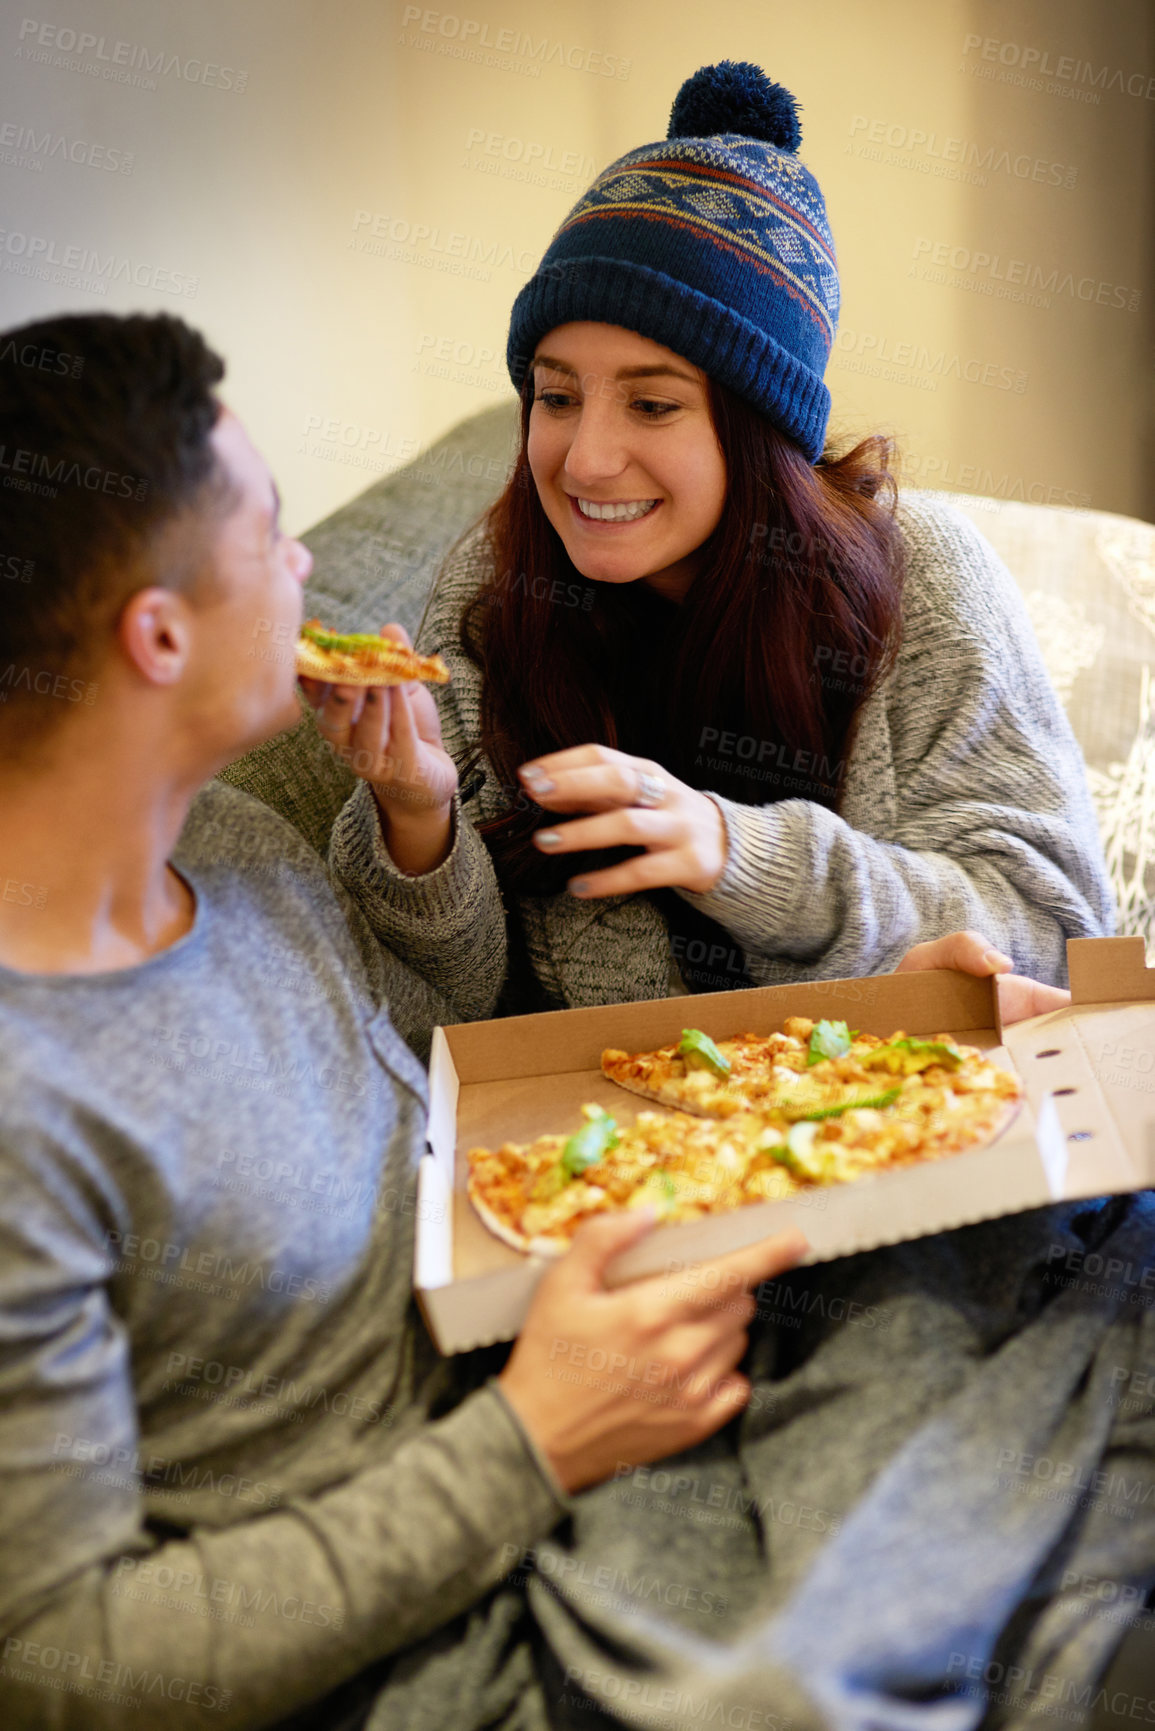 Buy stock photo Shot of a happy young couple eating pizza while relaxing on the sofa at home